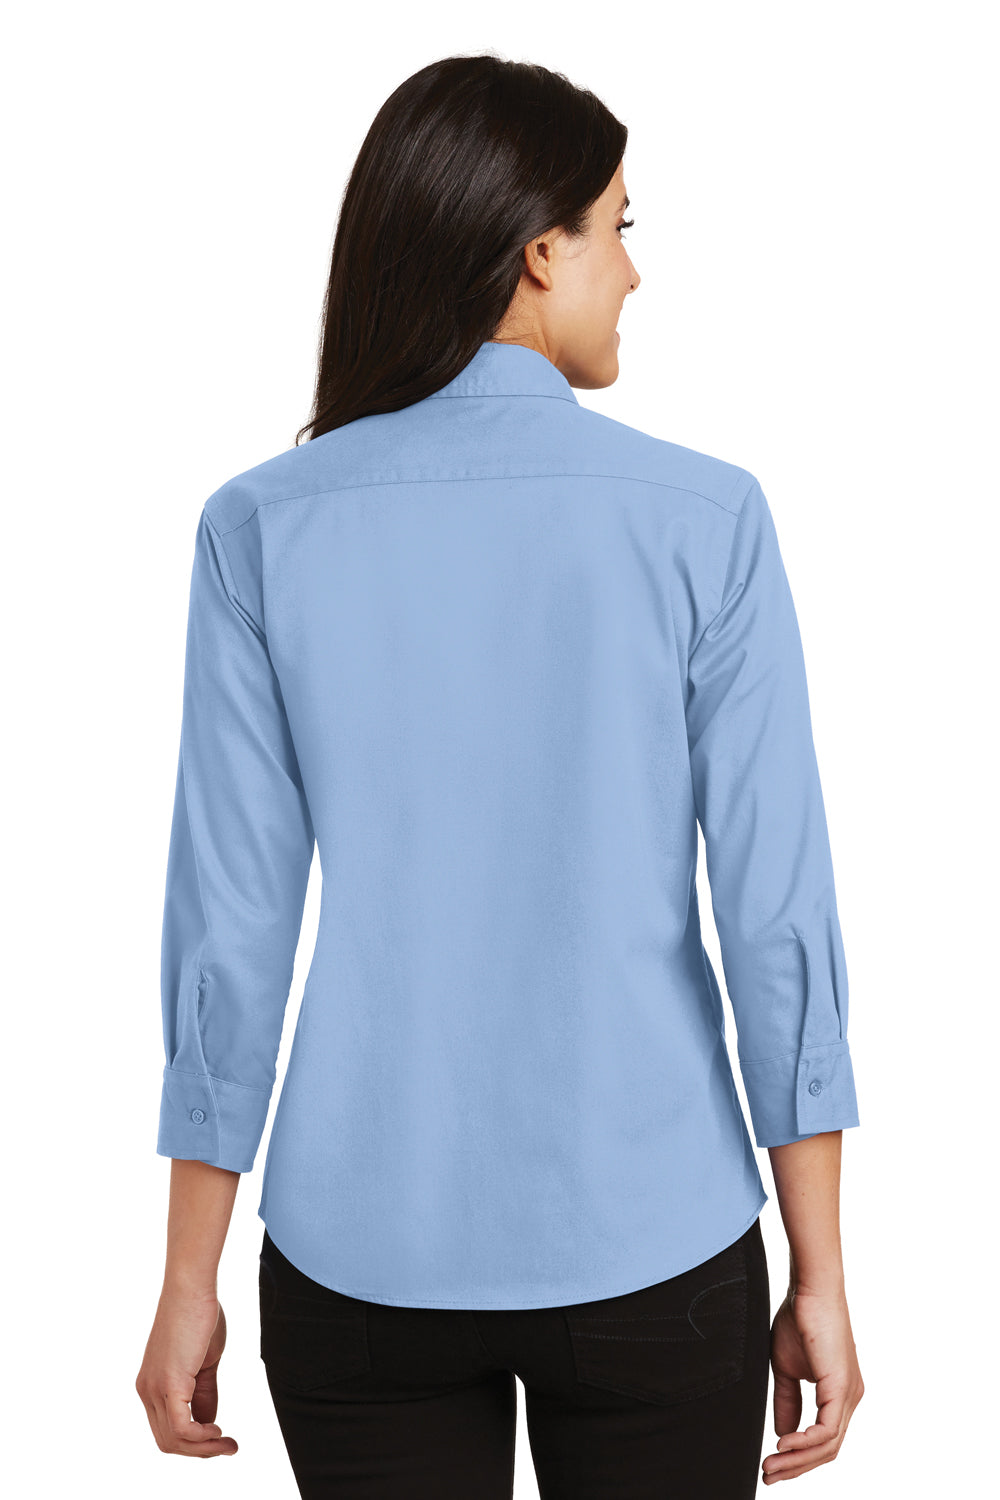 Port Authority L612 Womens Easy Care Wrinkle Resistant 3/4 Sleeve Button Down Shirt Light Blue Back